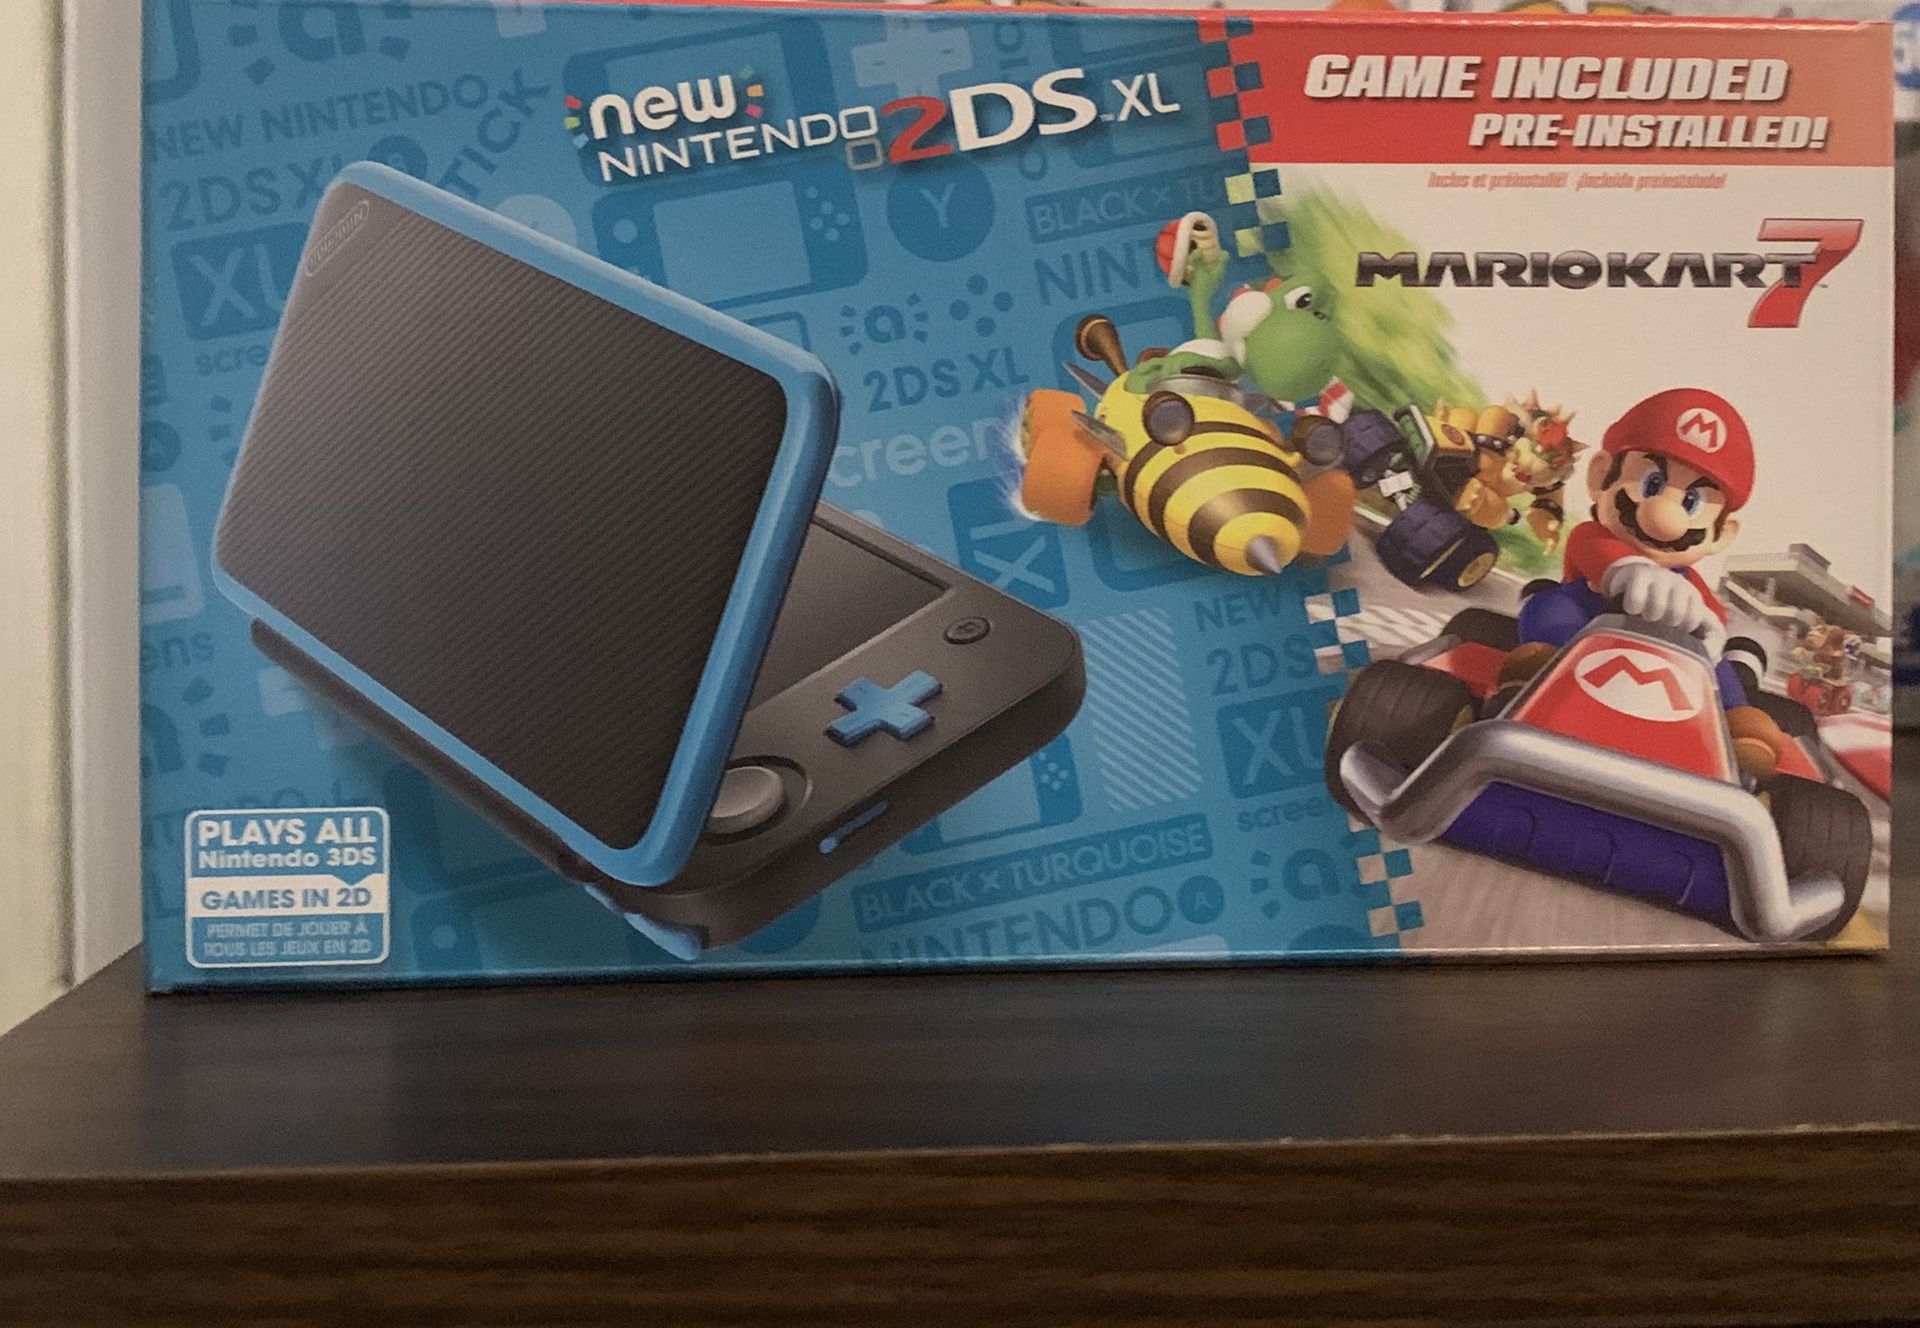 New Nintendo 2DS XL with Mario Kart 7 Pre-installed